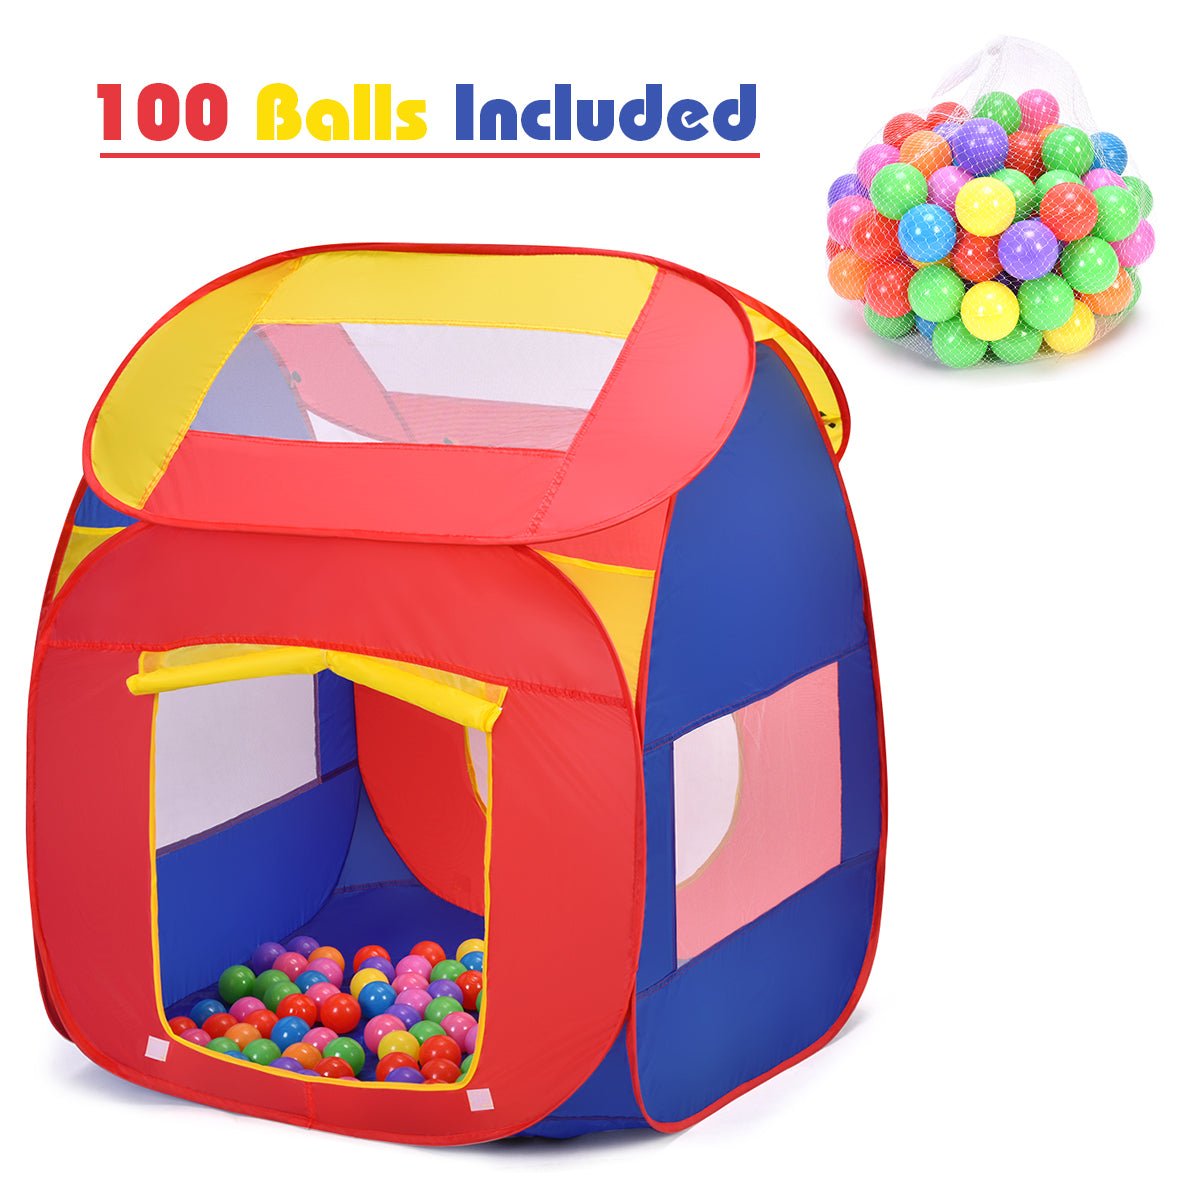 Adventure Awaits: Portable Baby Play House with 100 Balls for Active Play